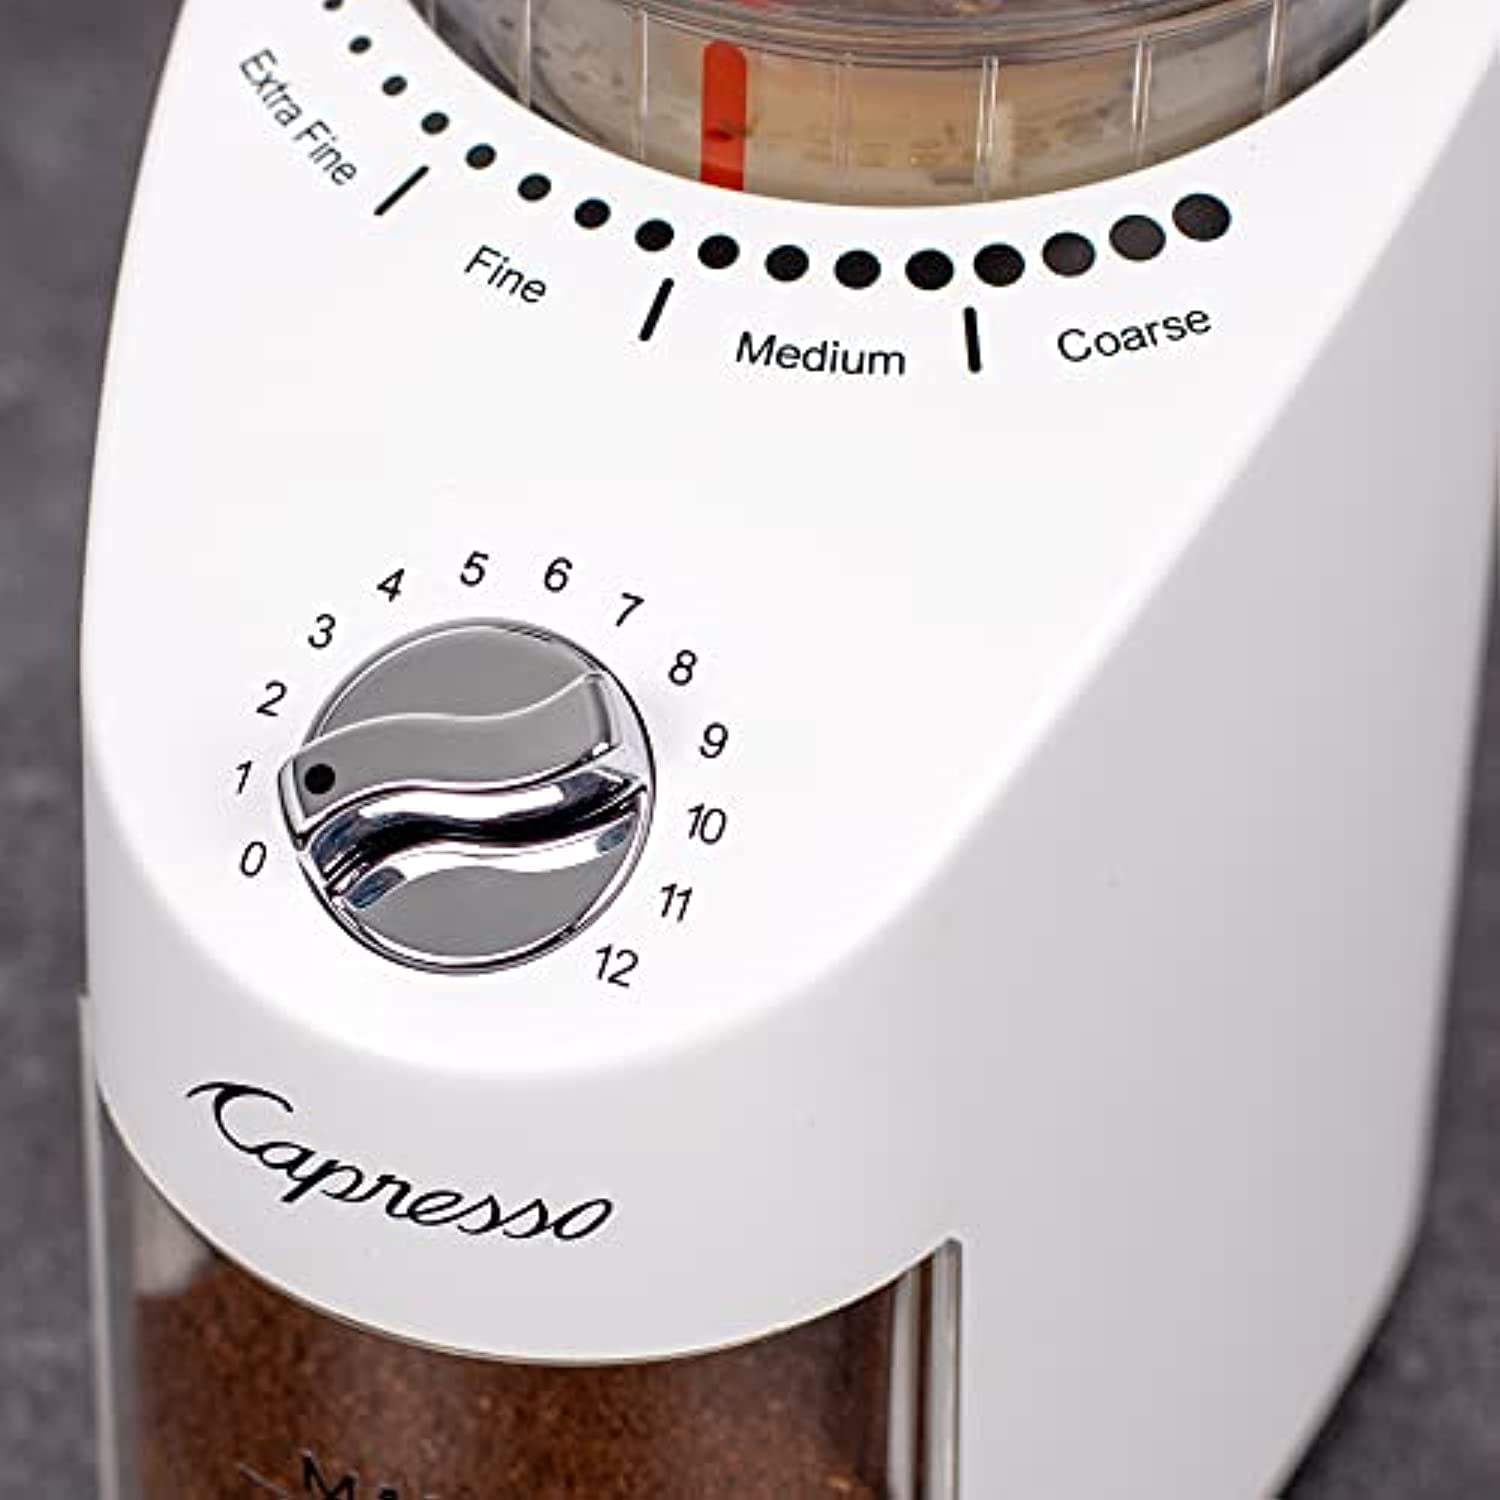  Capresso 575.05 Infinity Plus Conical Burr Grinder, Stainless  Steel Bundle East Coast Blend Coffee Beans and Coffee Grinder Dusting Brush  (3 Items) : Home & Kitchen